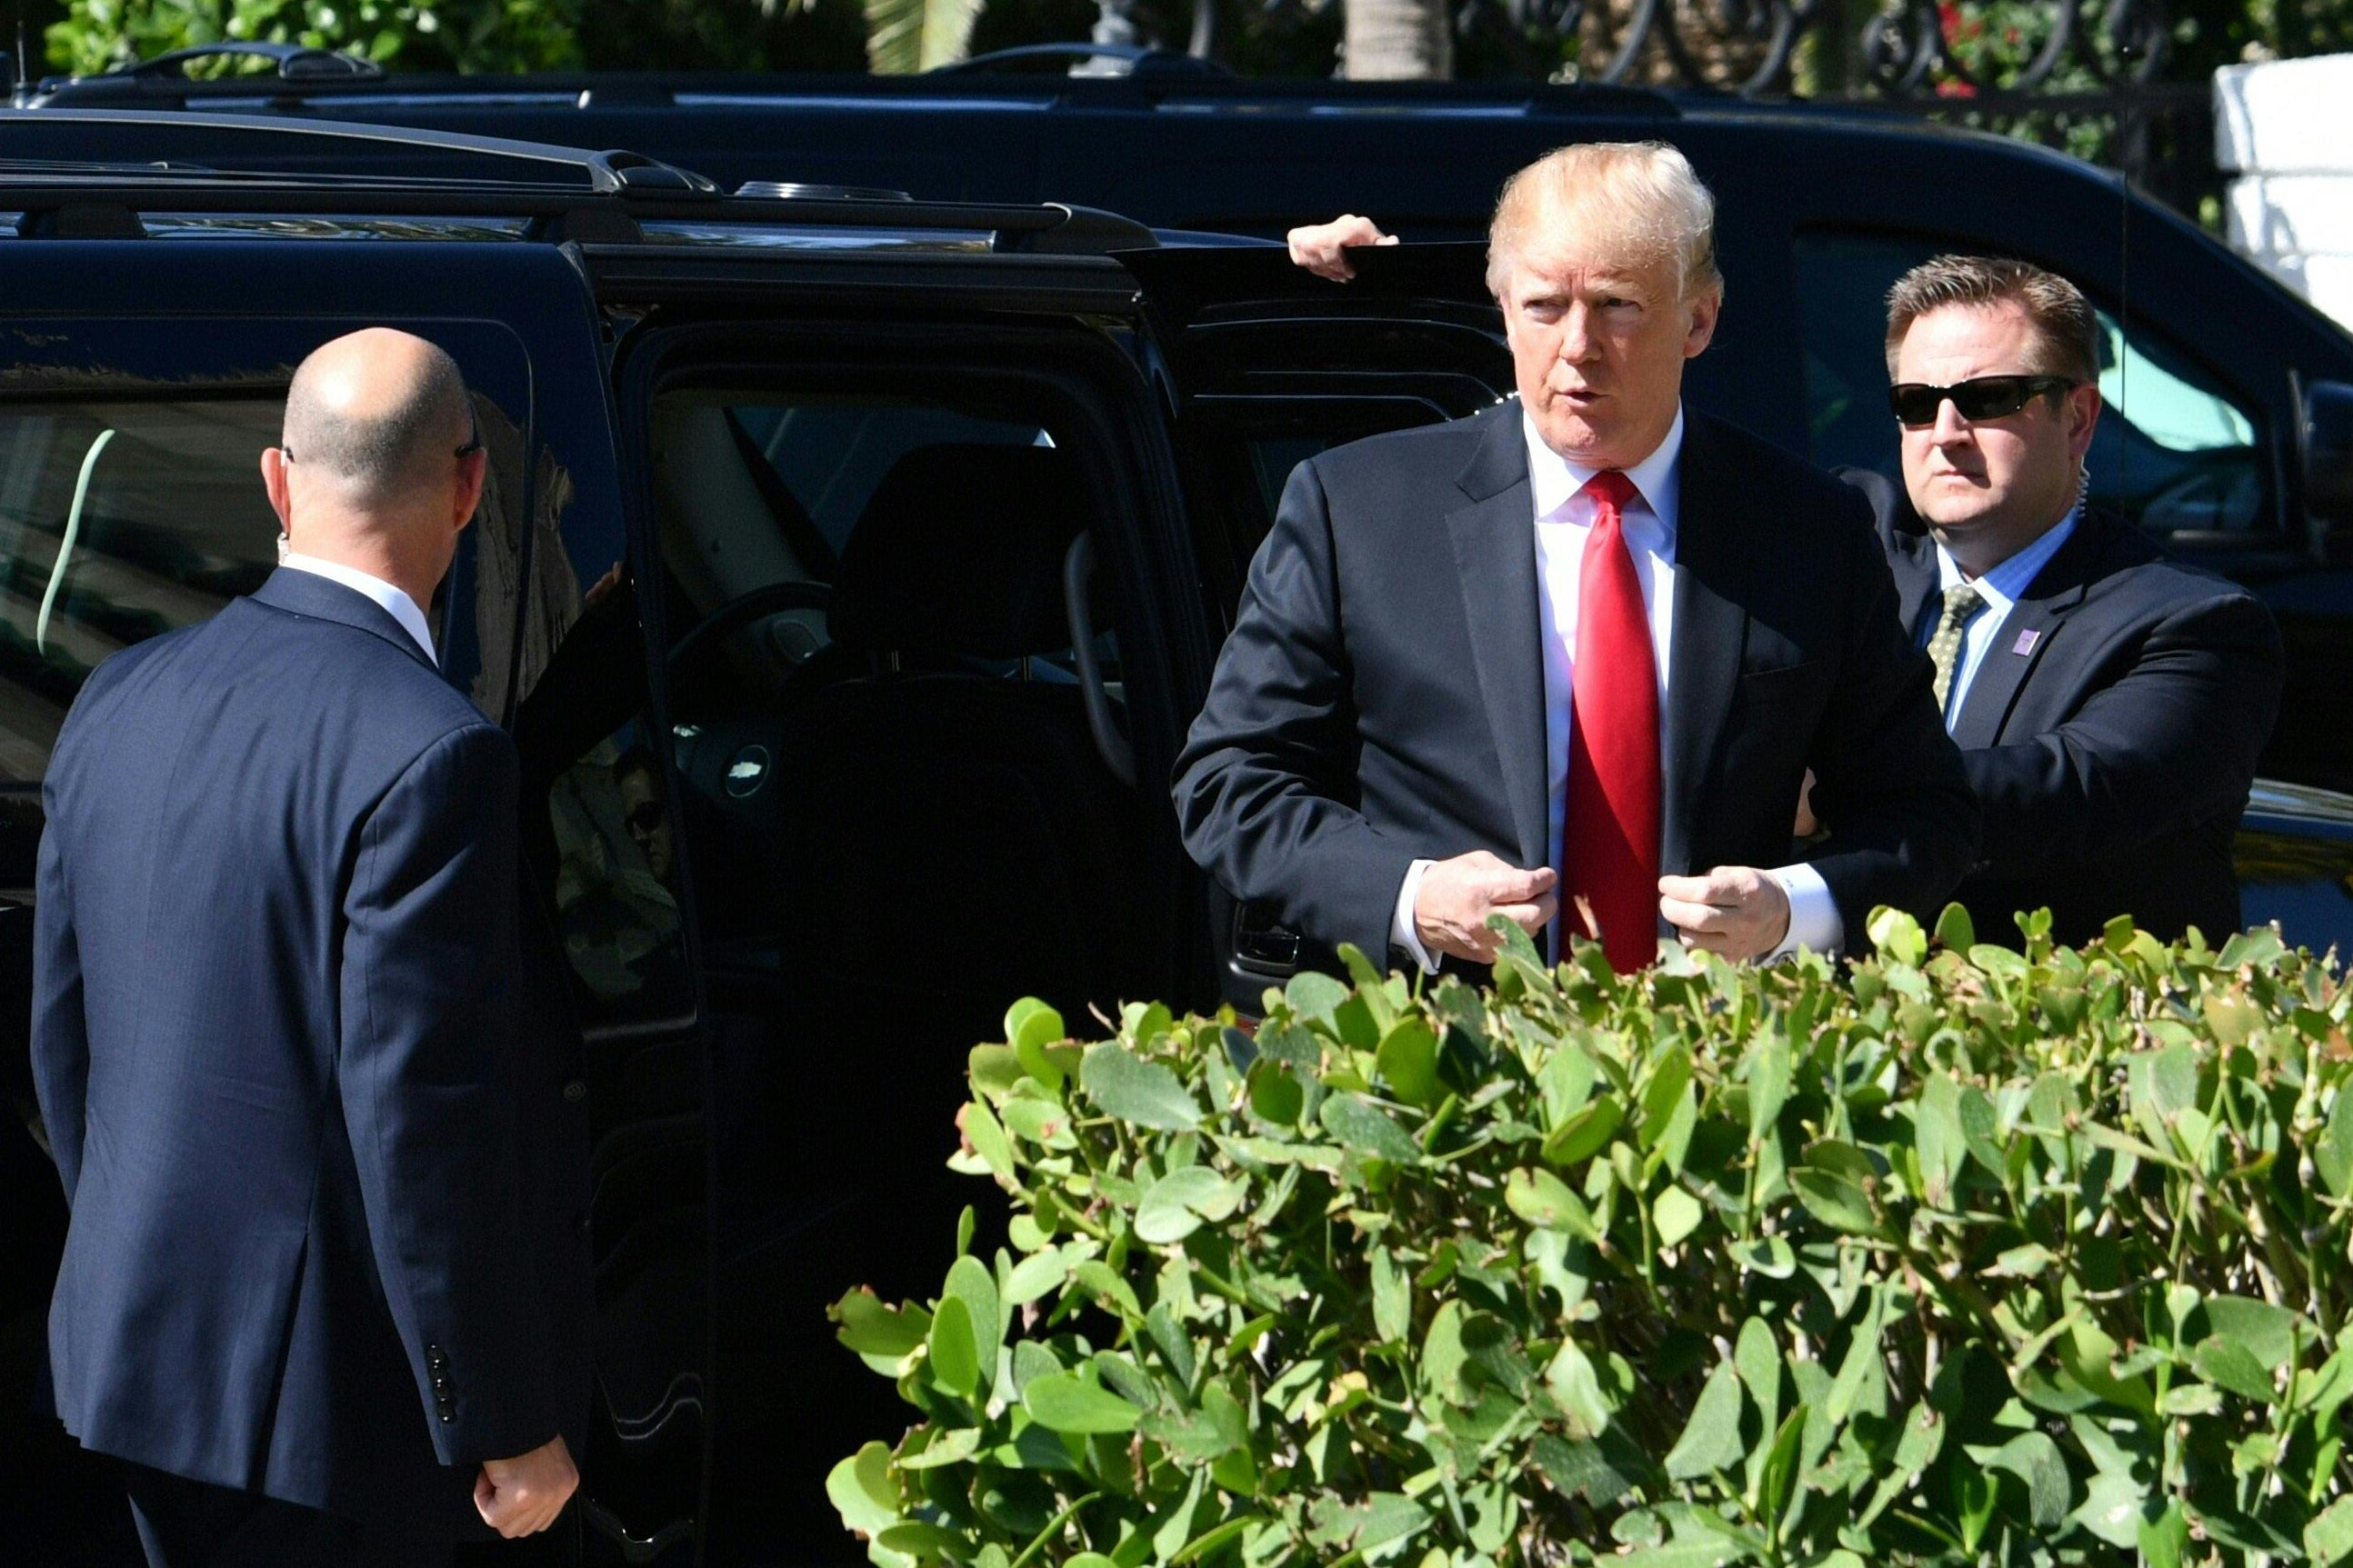 President Trump emerges from a black SUV.